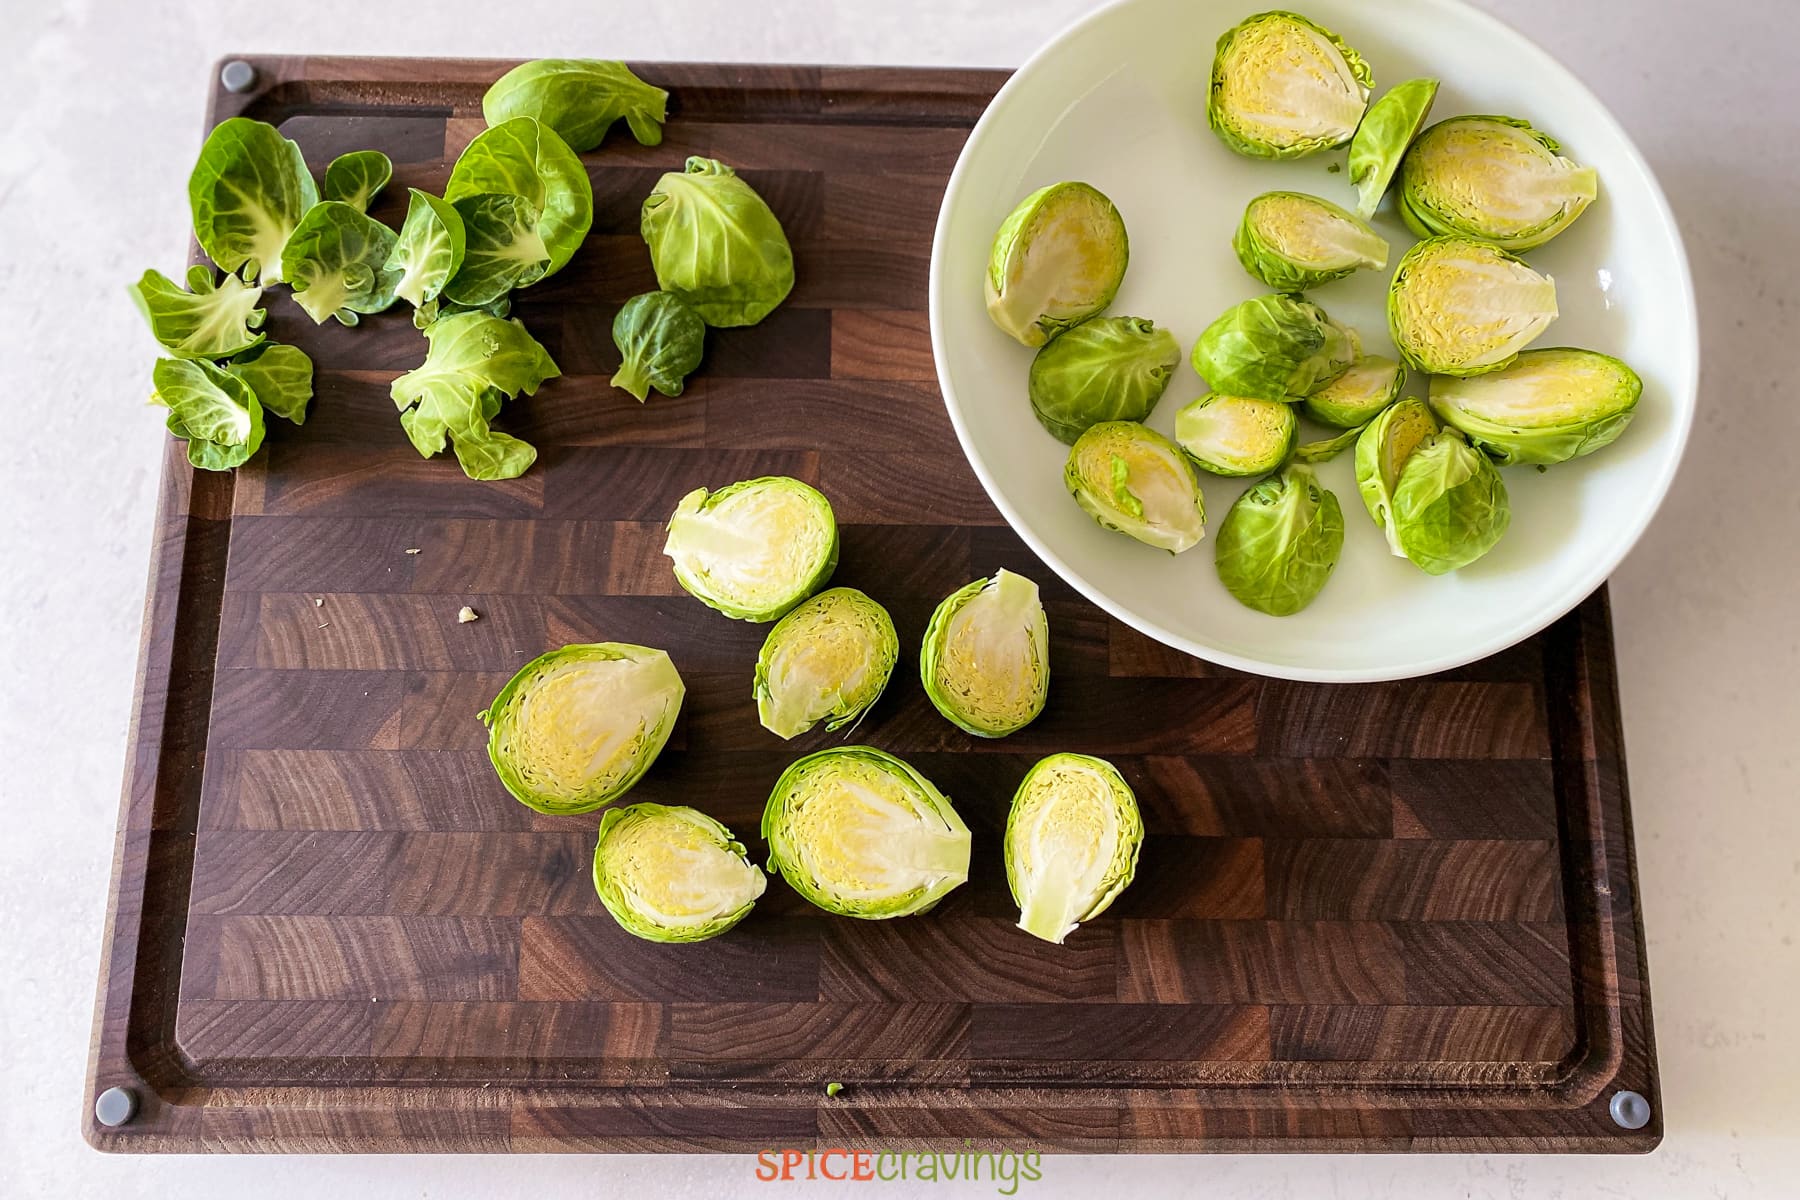 Halved brussel sprouts on cutting board and white bowl